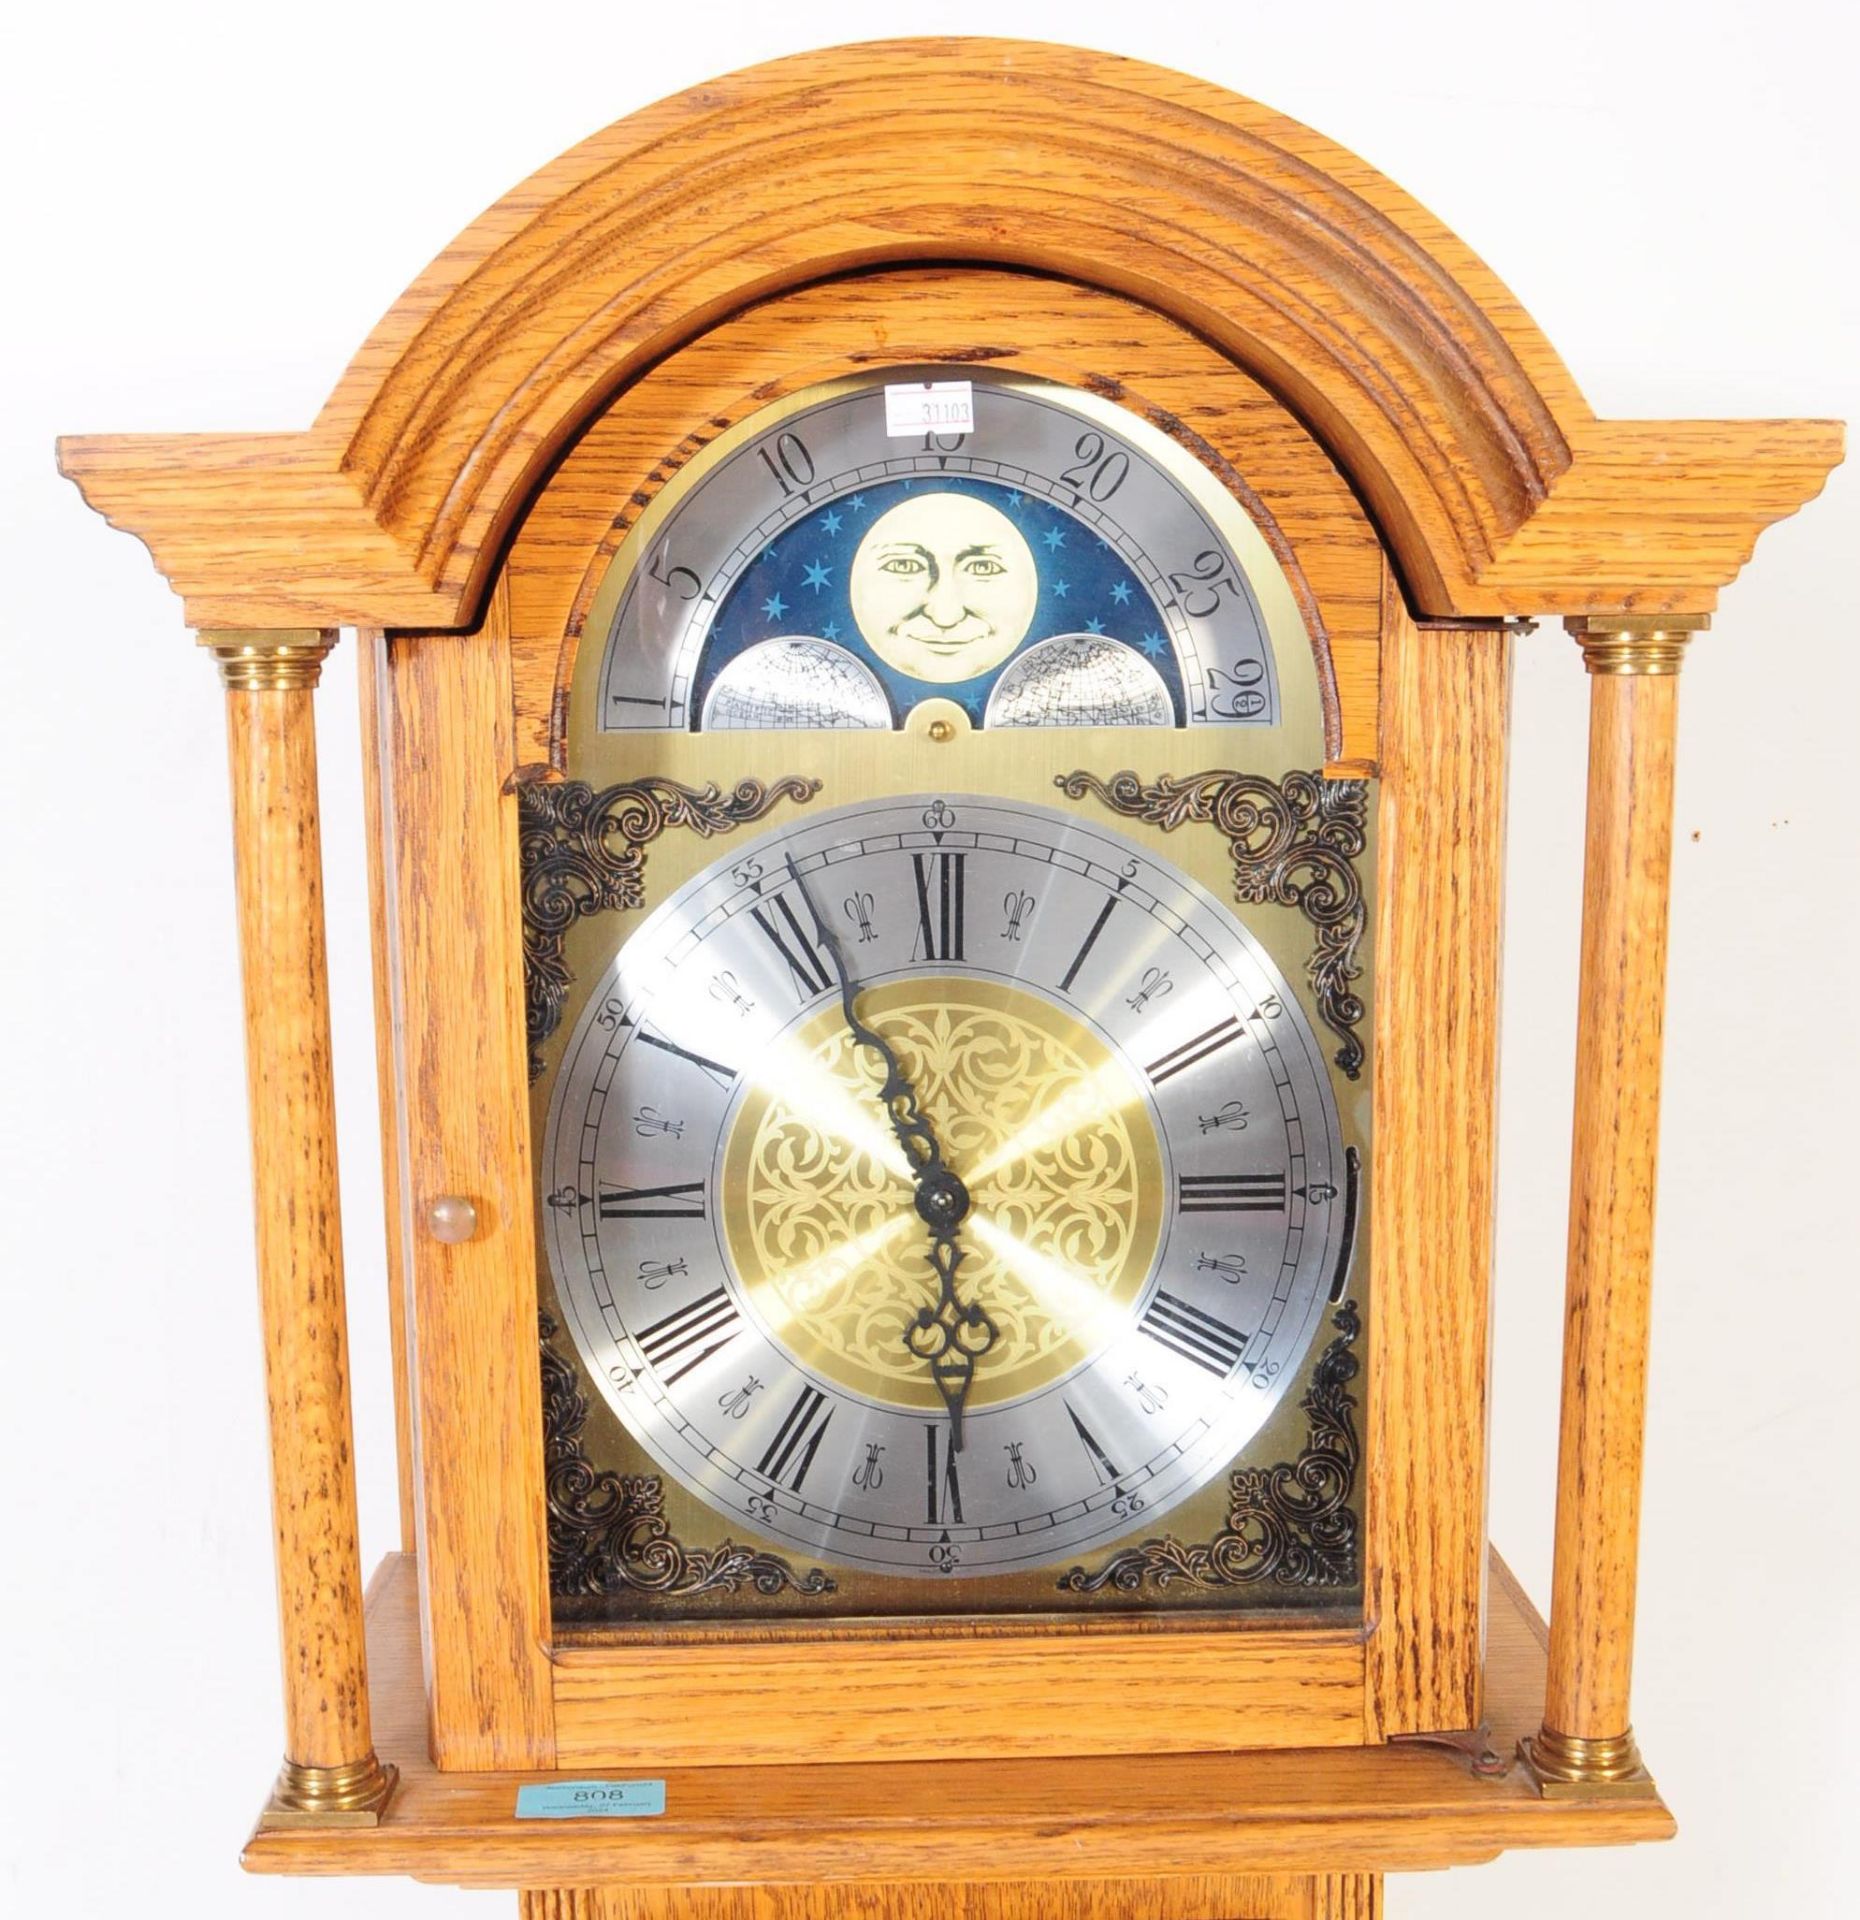 EARLY 20TH CENTURY ARTS & CRAFTS OAK GRANDMOTHER CLOCK - Image 3 of 9